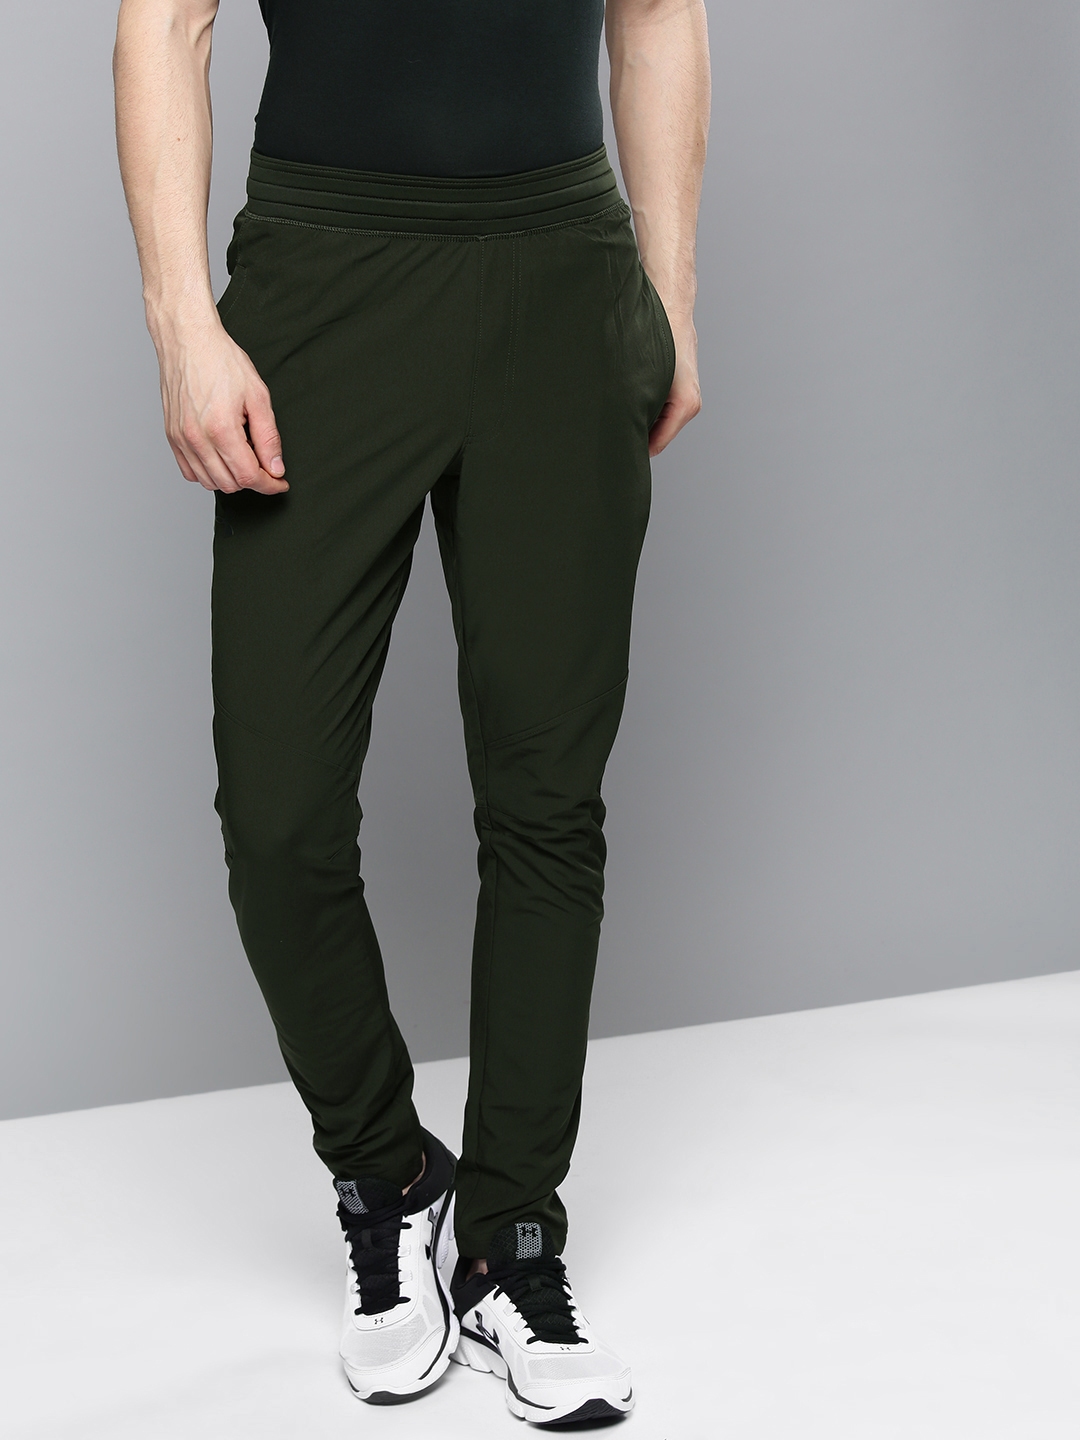 green under armour pants